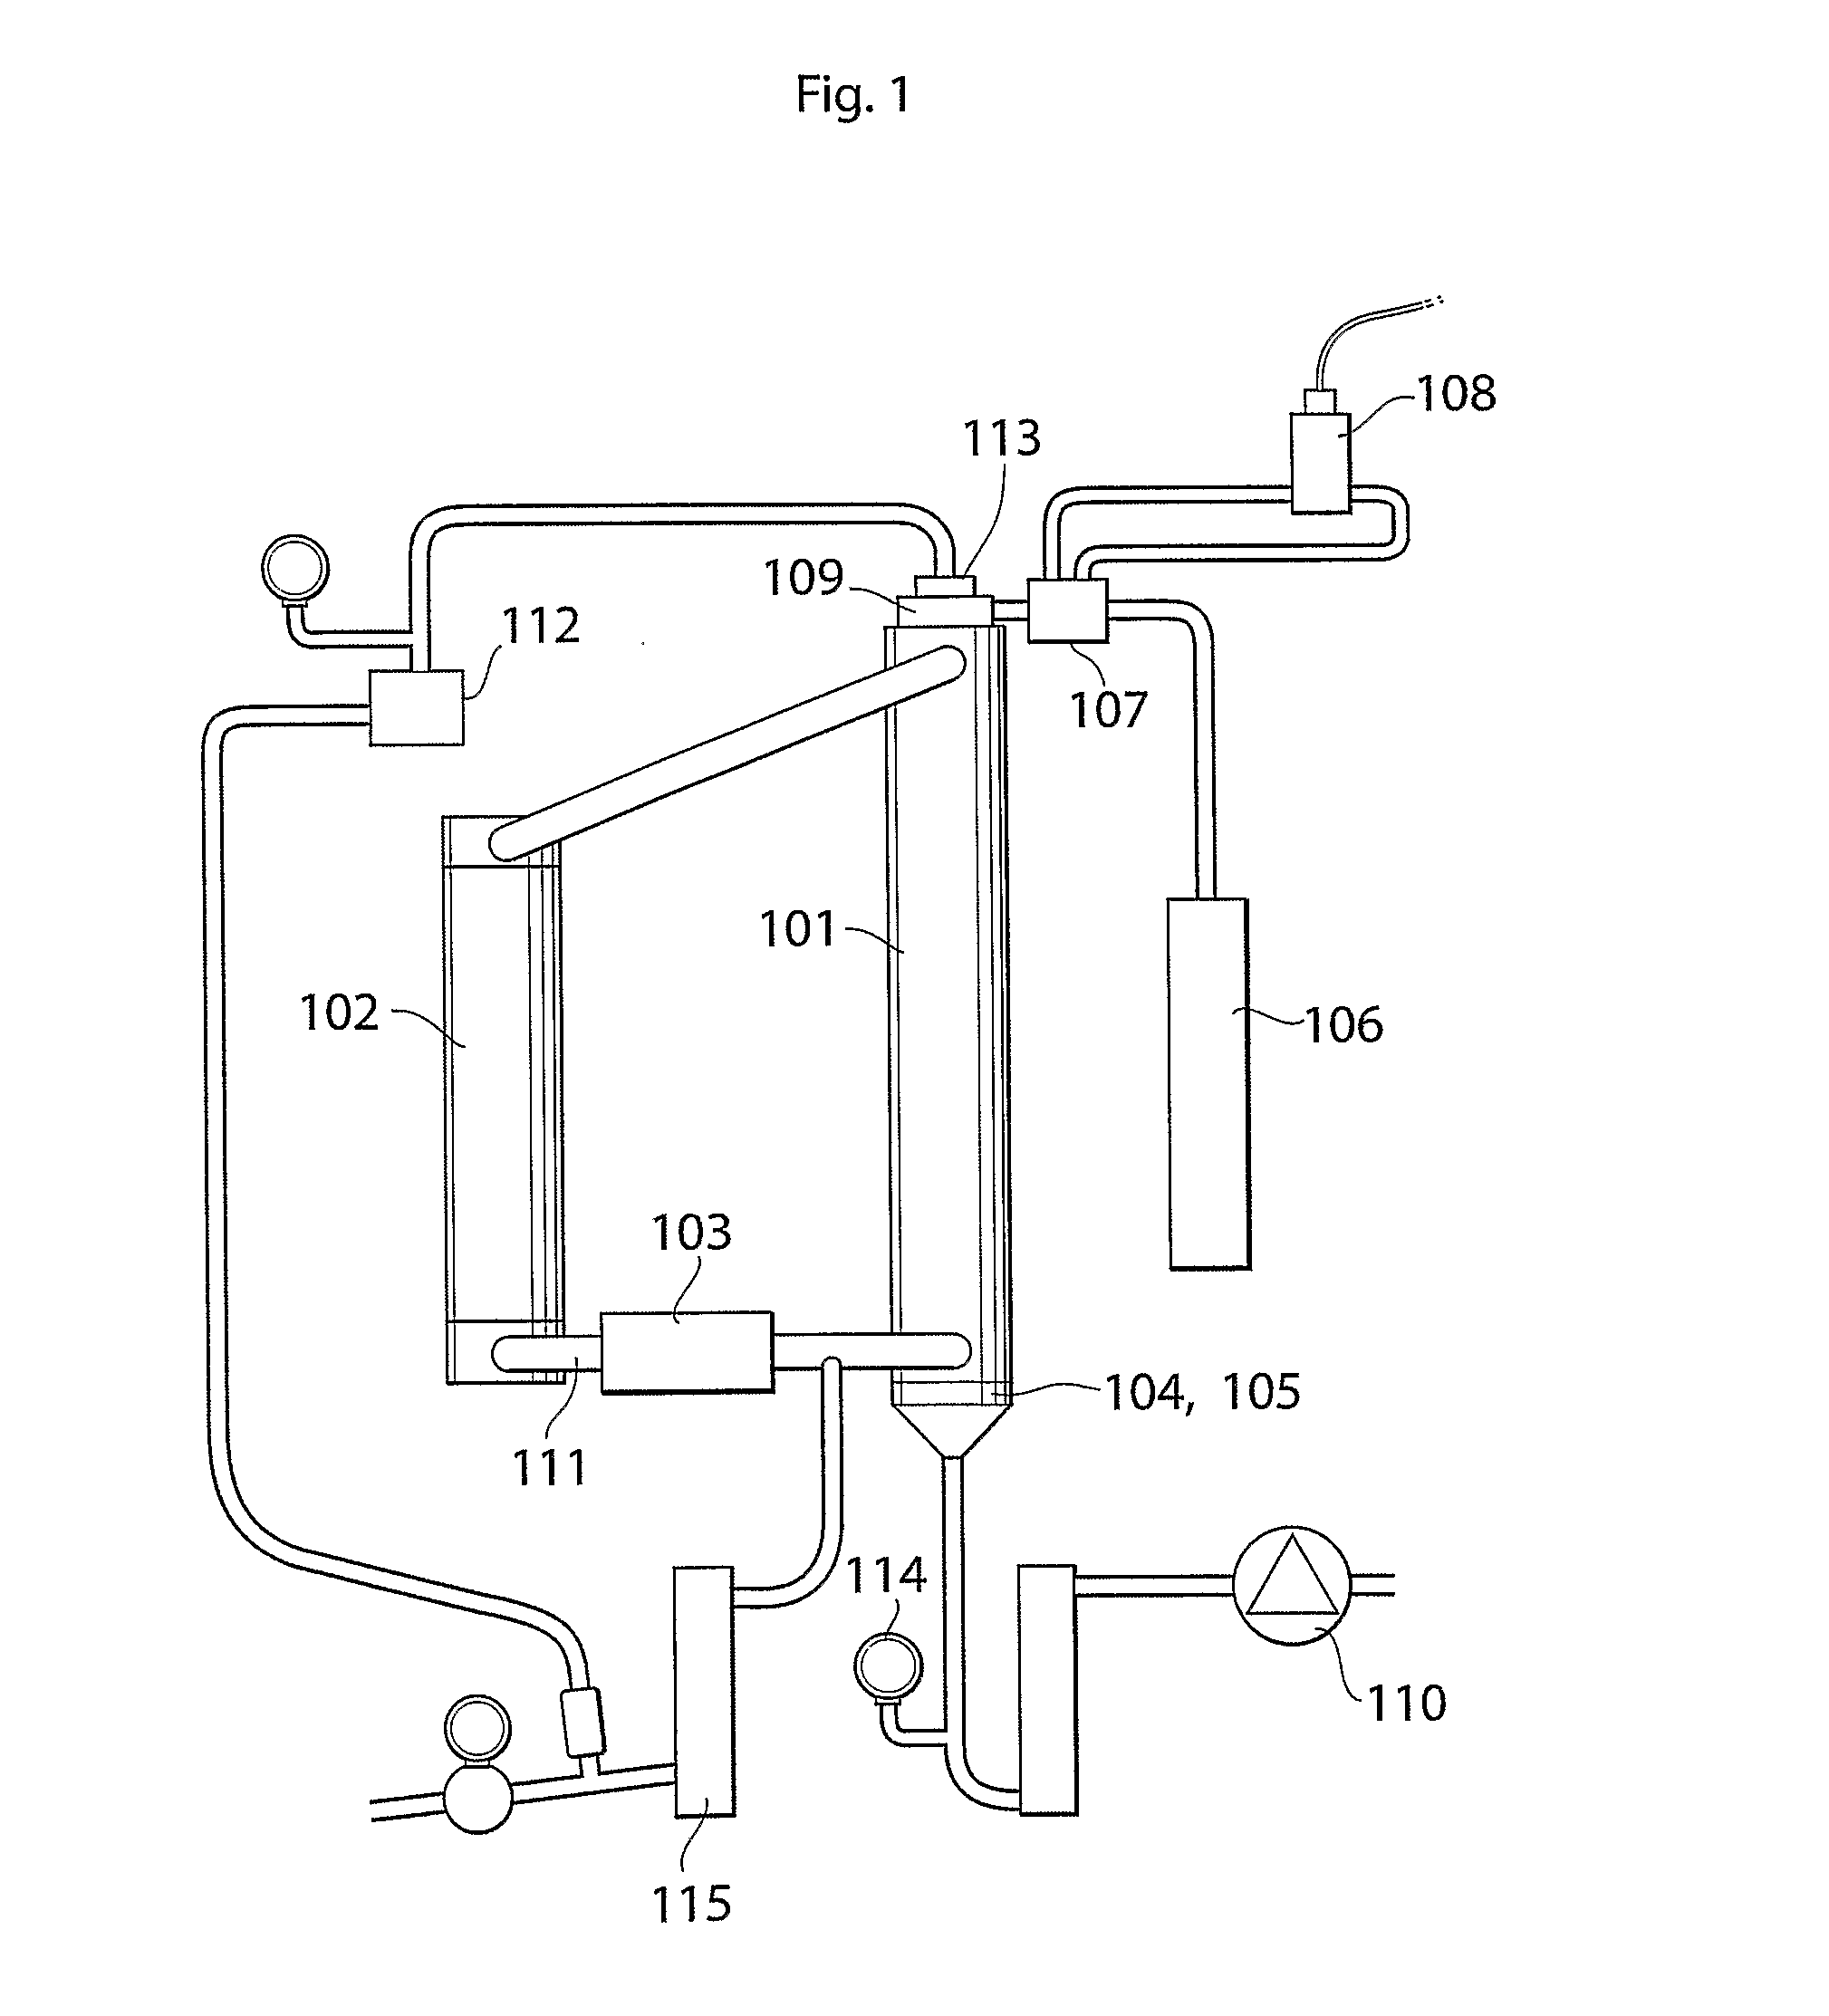 System and Method for Producing Dry Formulations